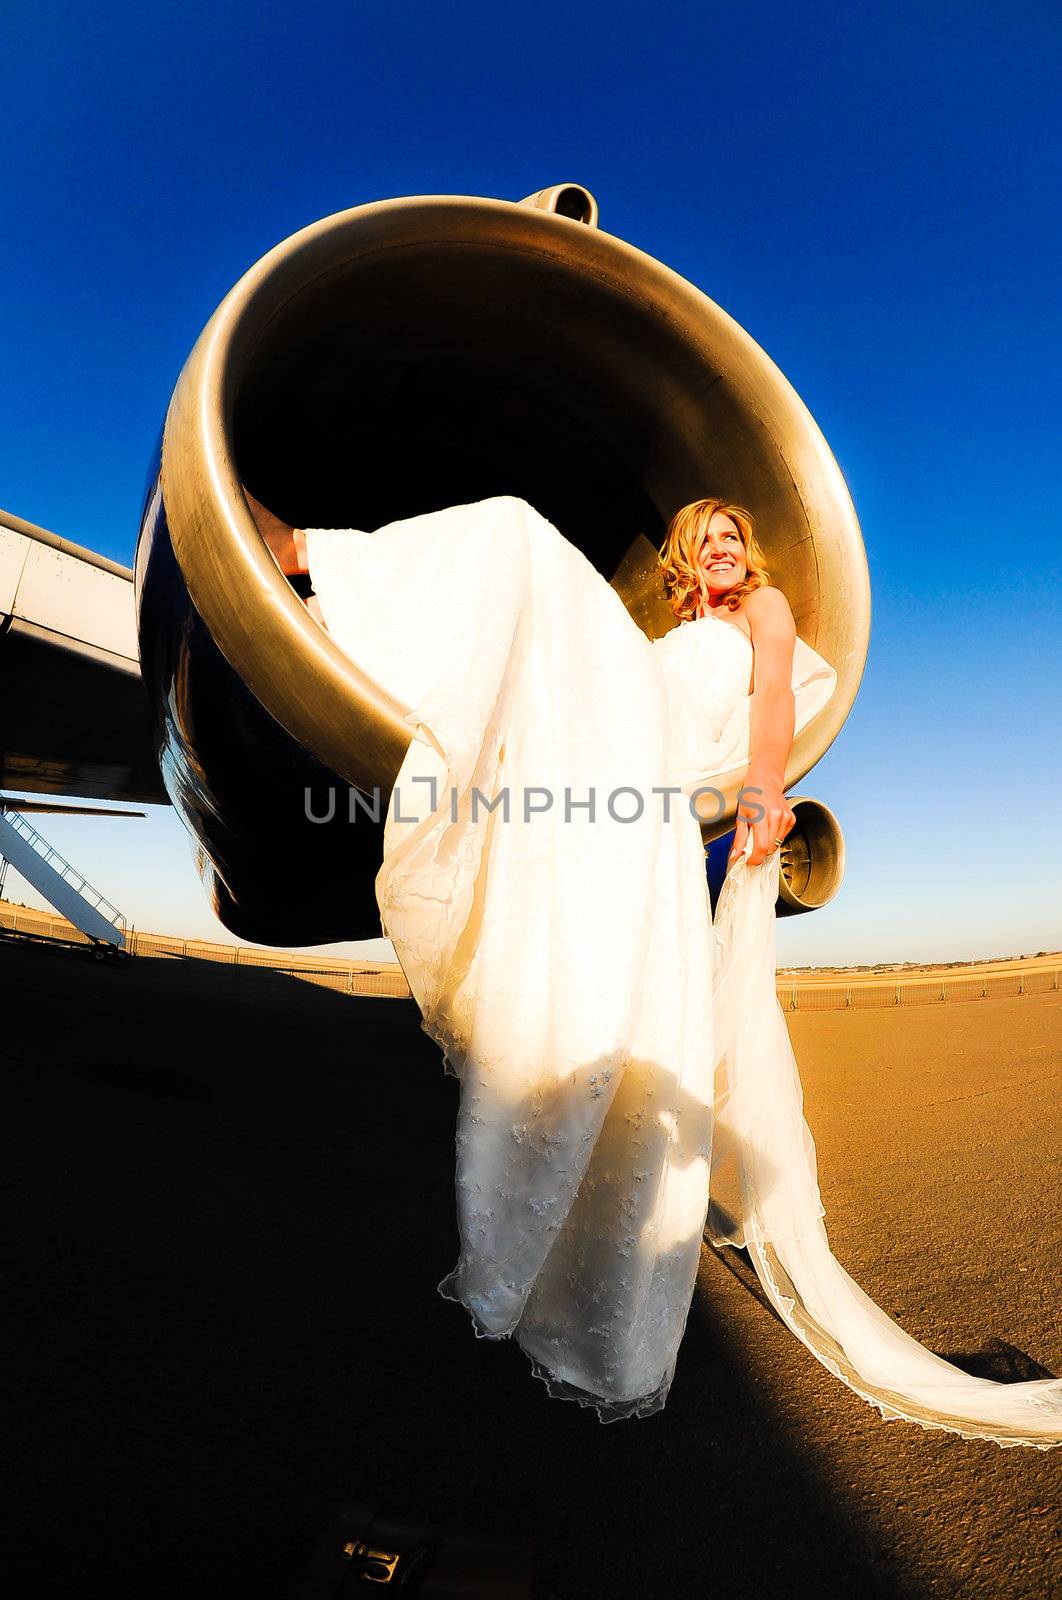 sexy young adult wedding model laying inside the engine intake of Boeing passenger aircraft